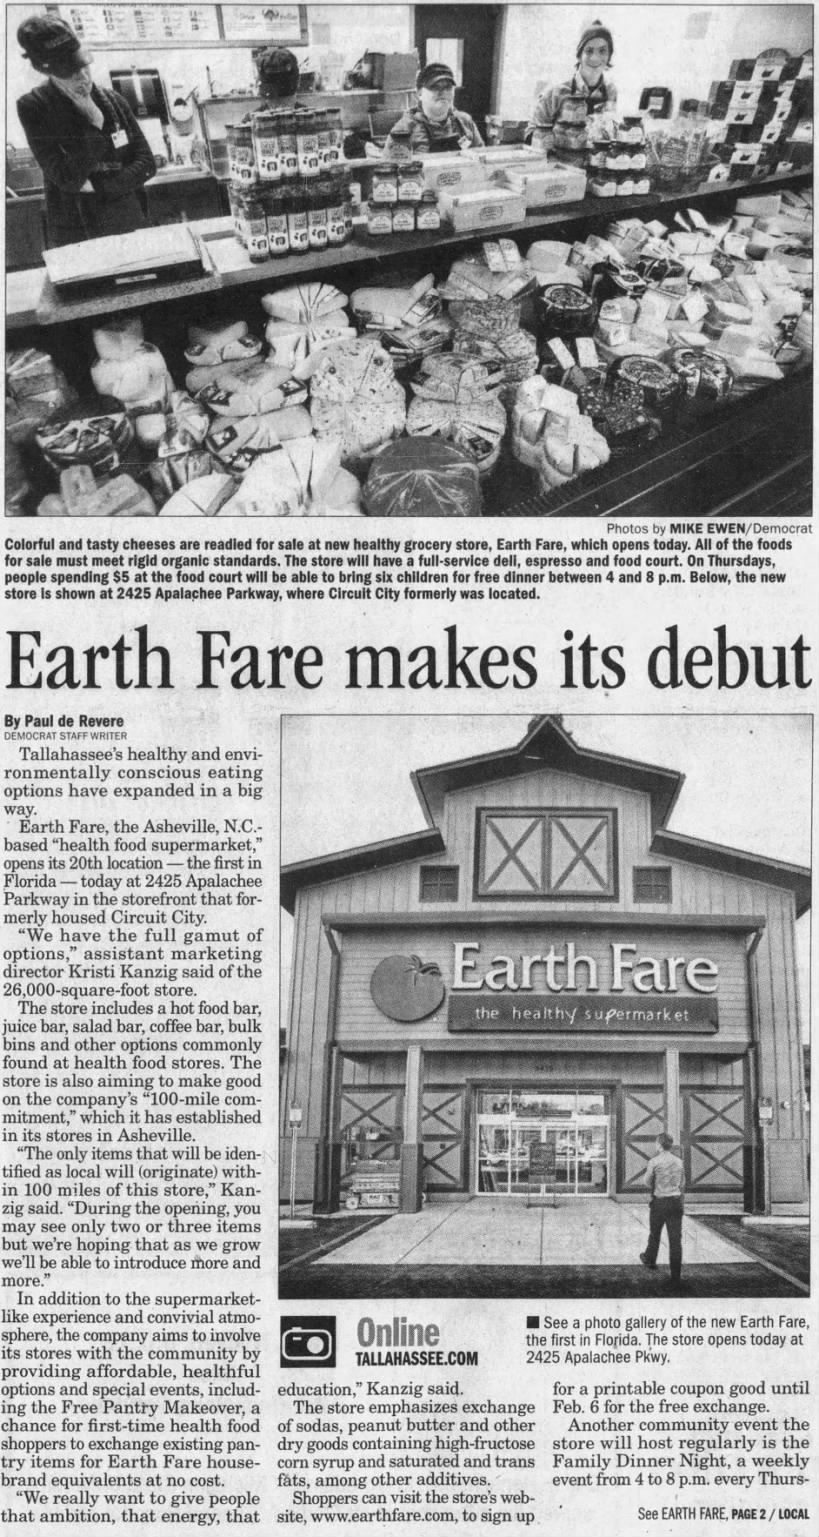 Earth Fare makes its debut in Tallahassee in former Circuit City